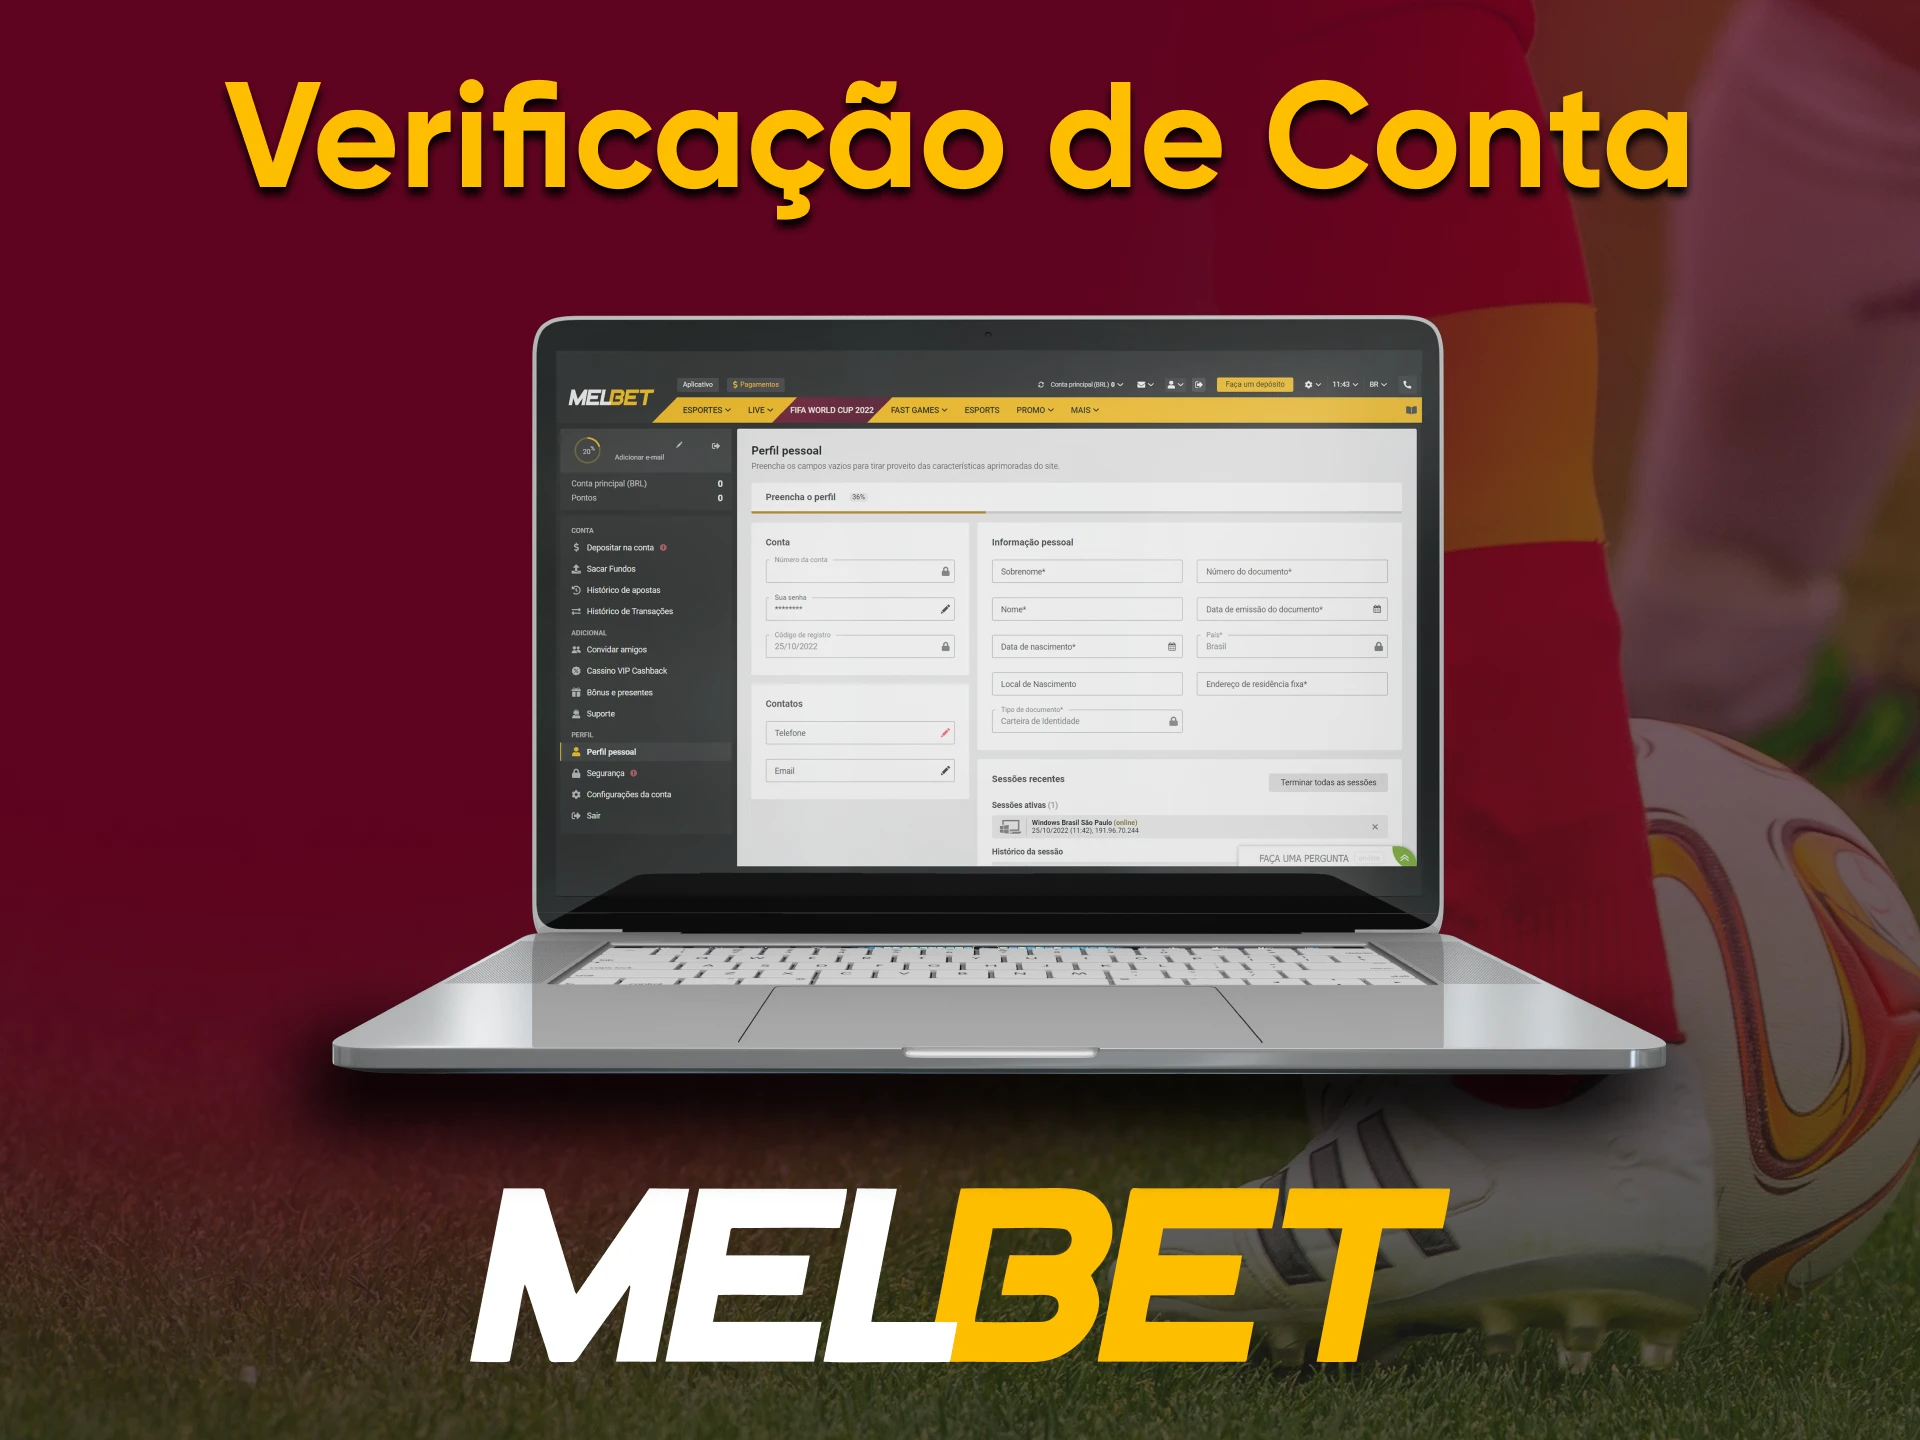 To bet on Melbet, you need to enter your details.